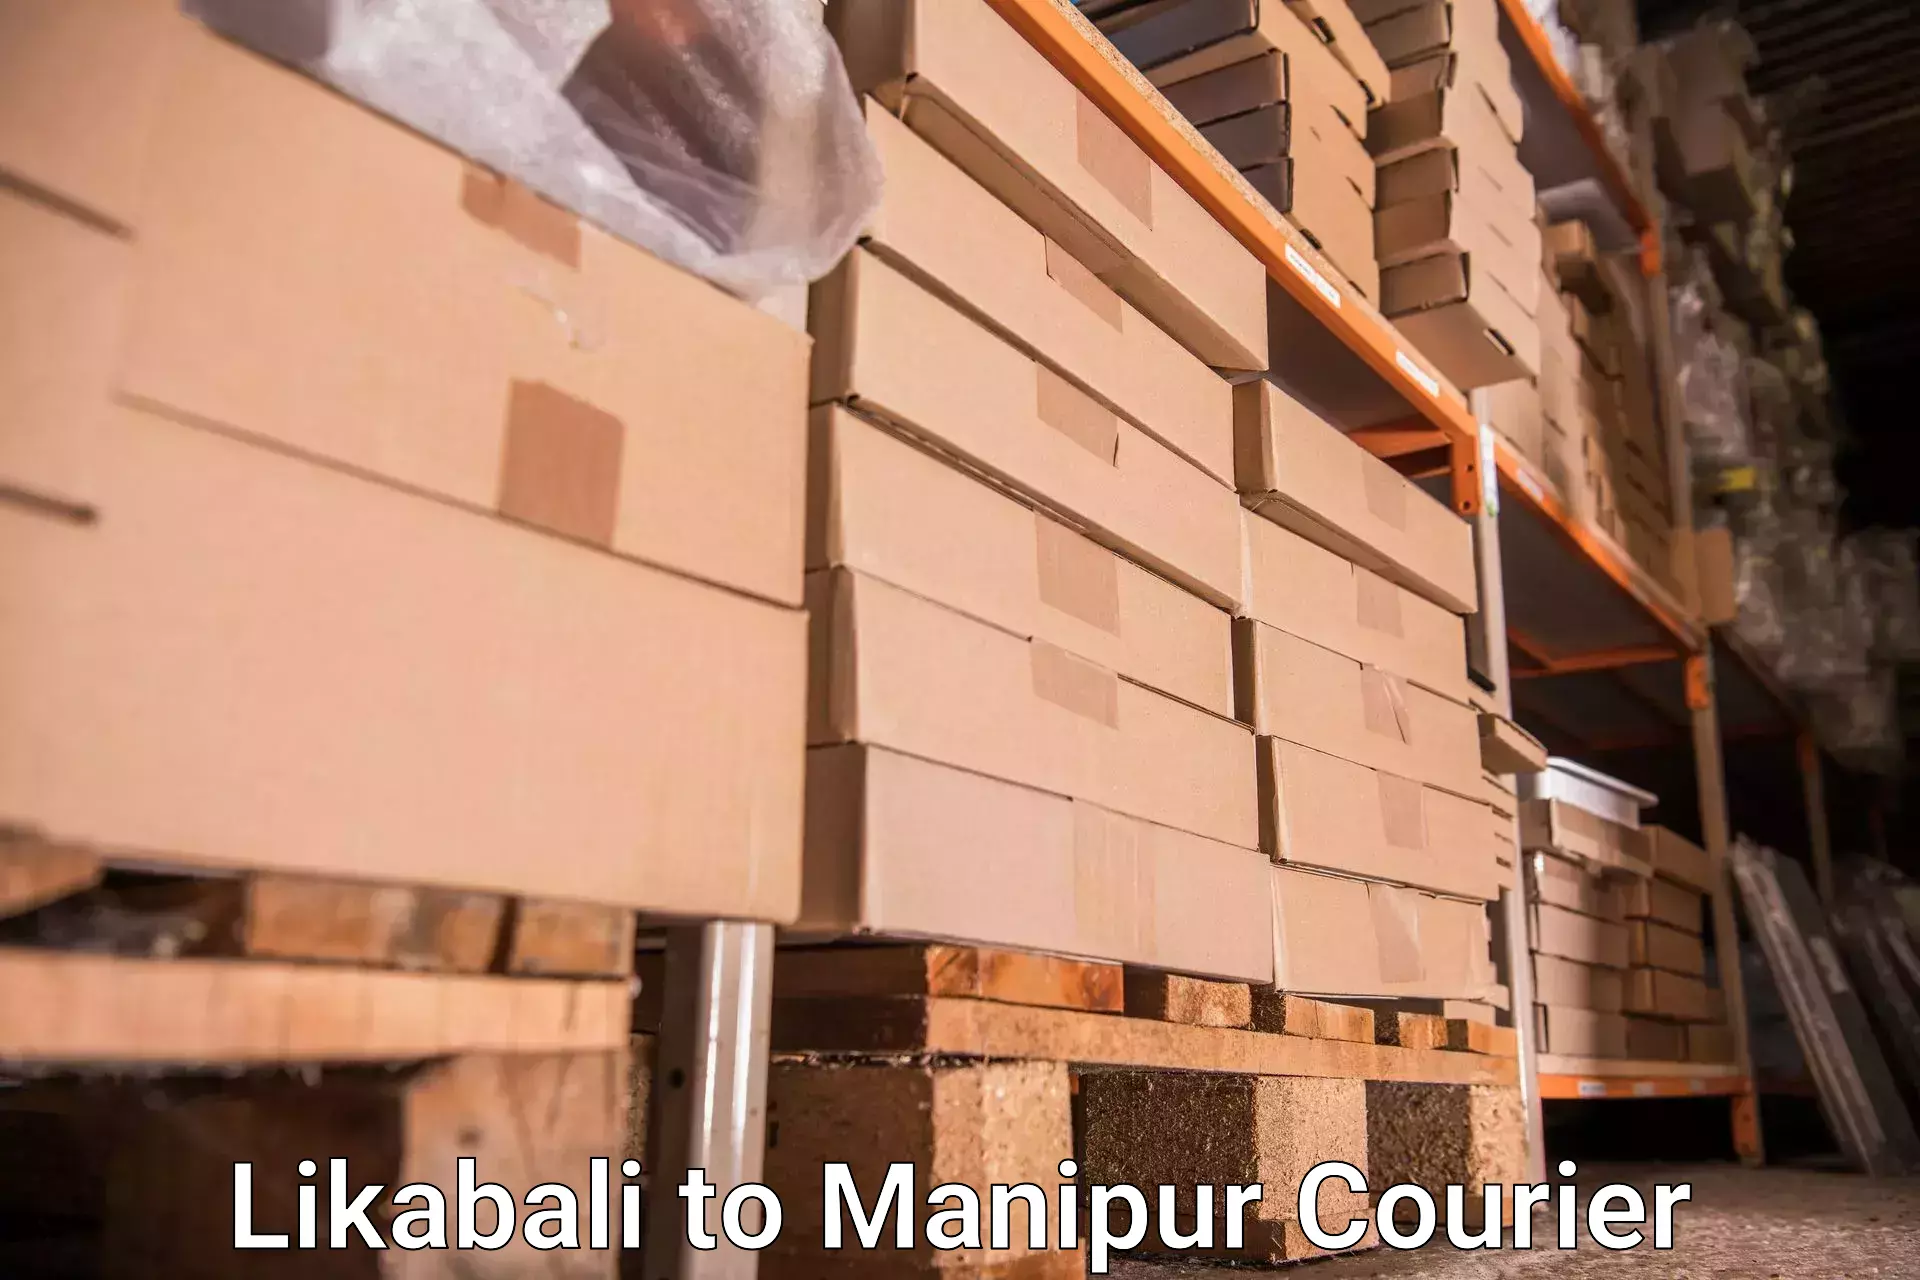 Baggage relocation service Likabali to Manipur